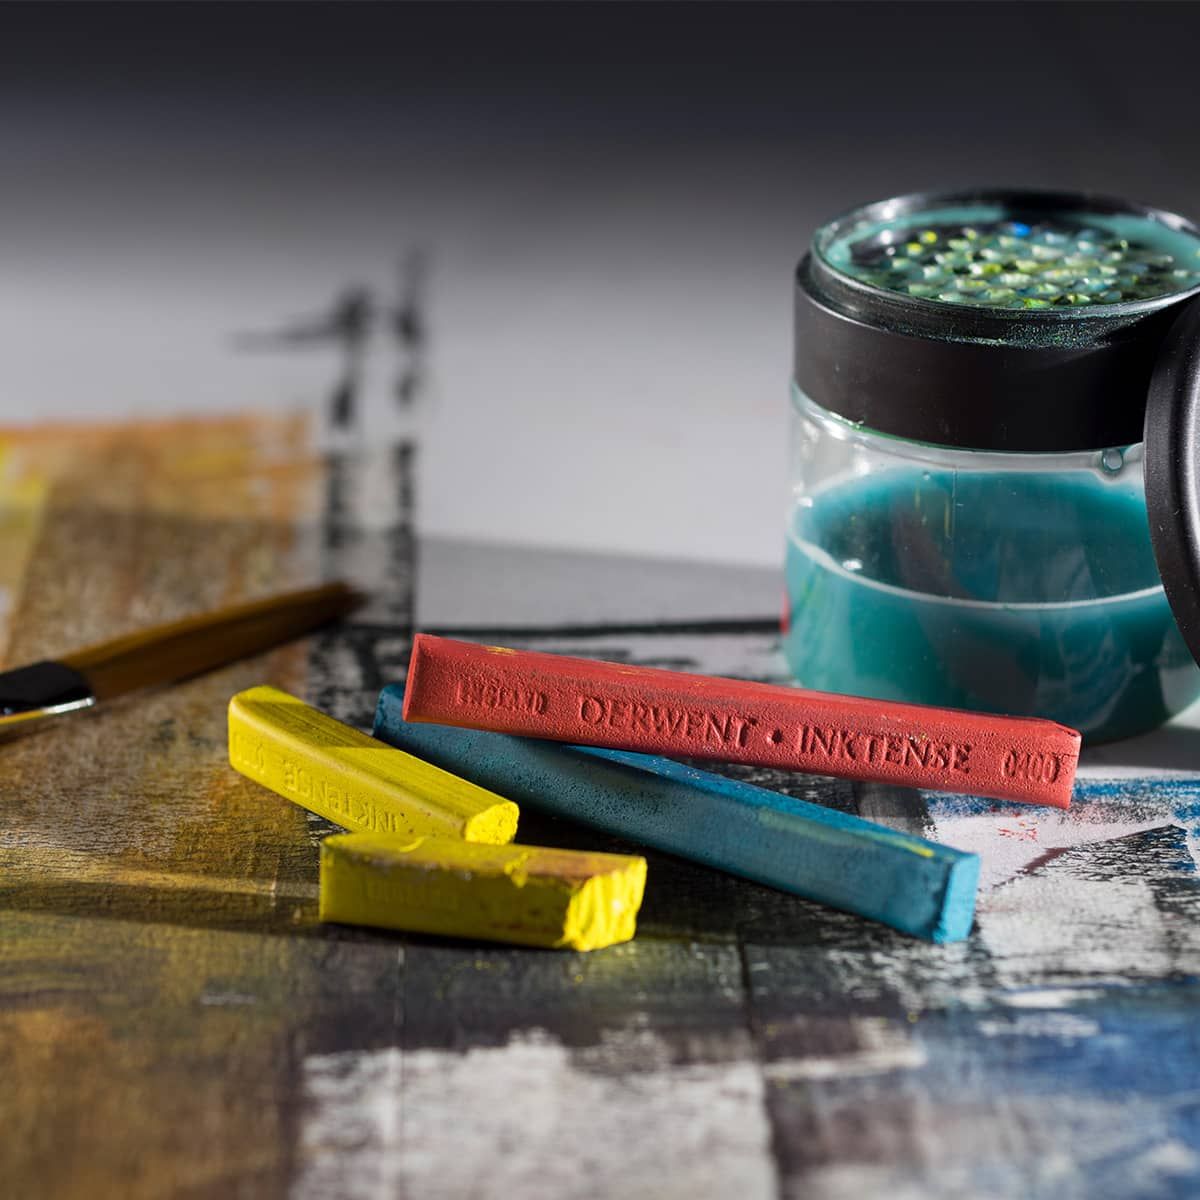 water soluble sticks that produce vibrant strokes and washes